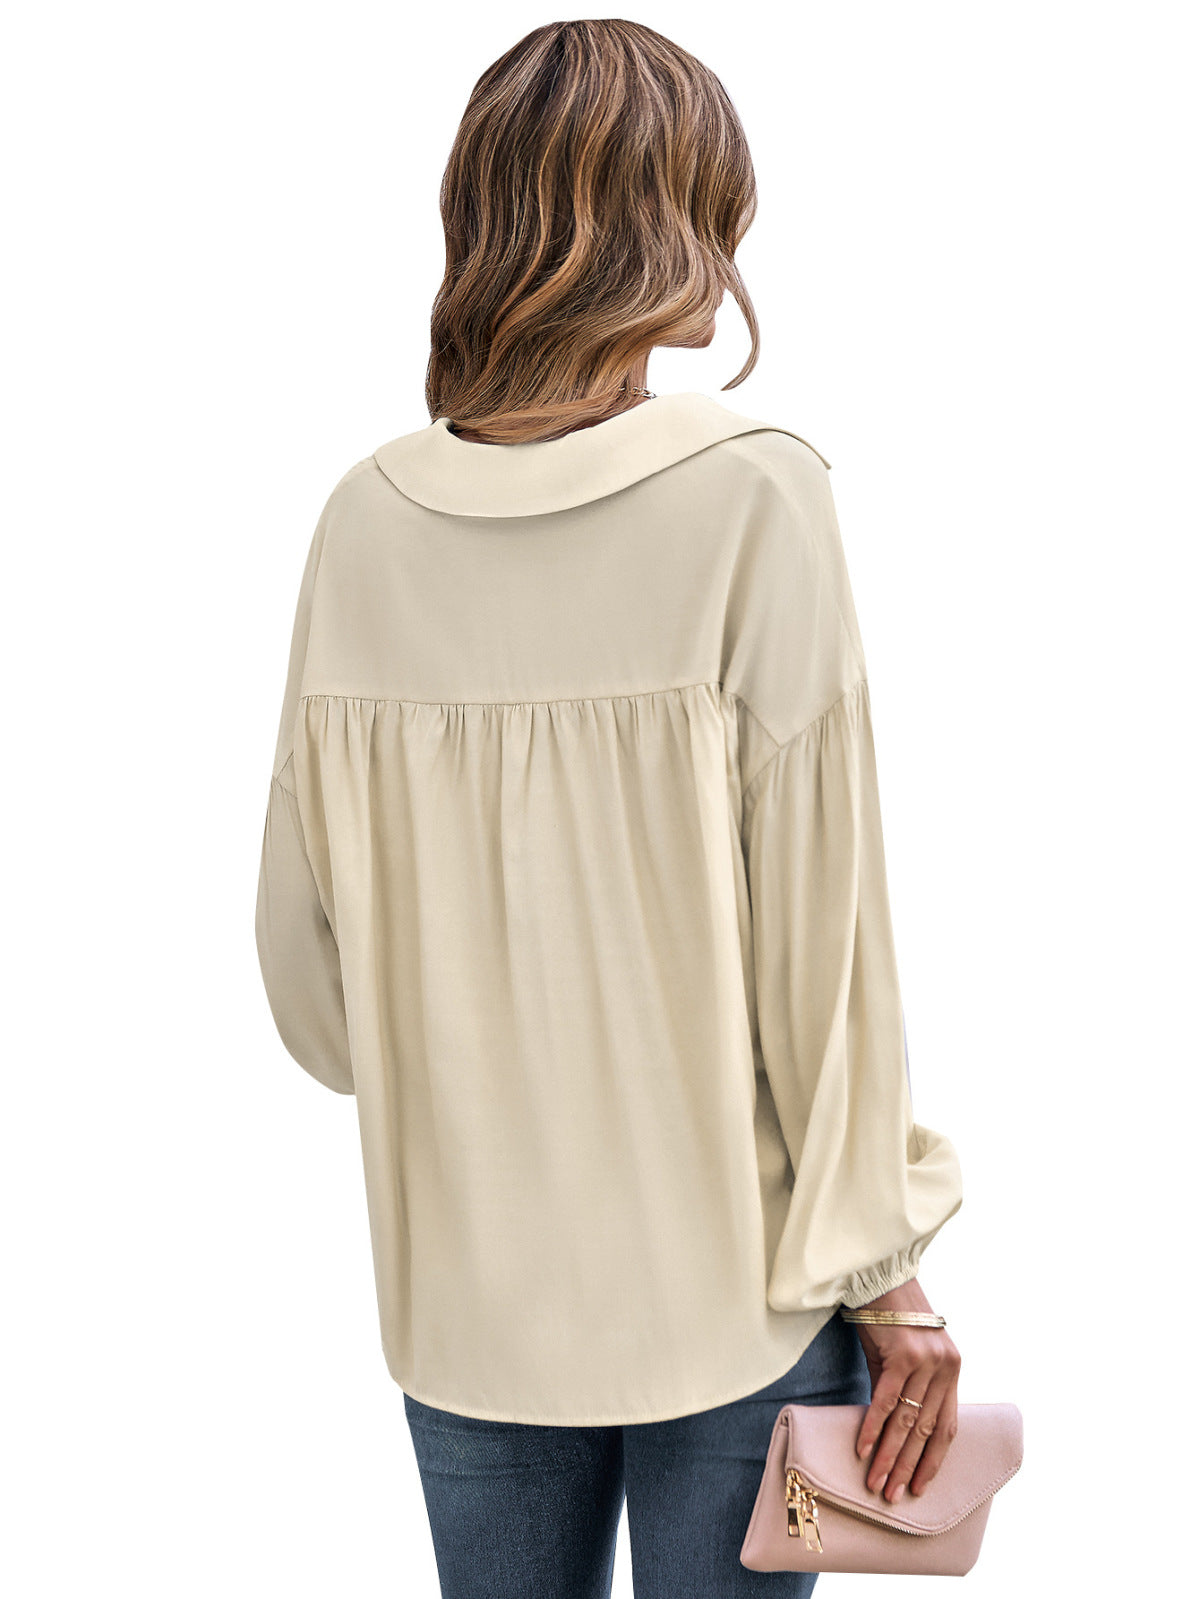 Collared Neck Lantern Sleeve Single-Breasted Solid Color Blouse